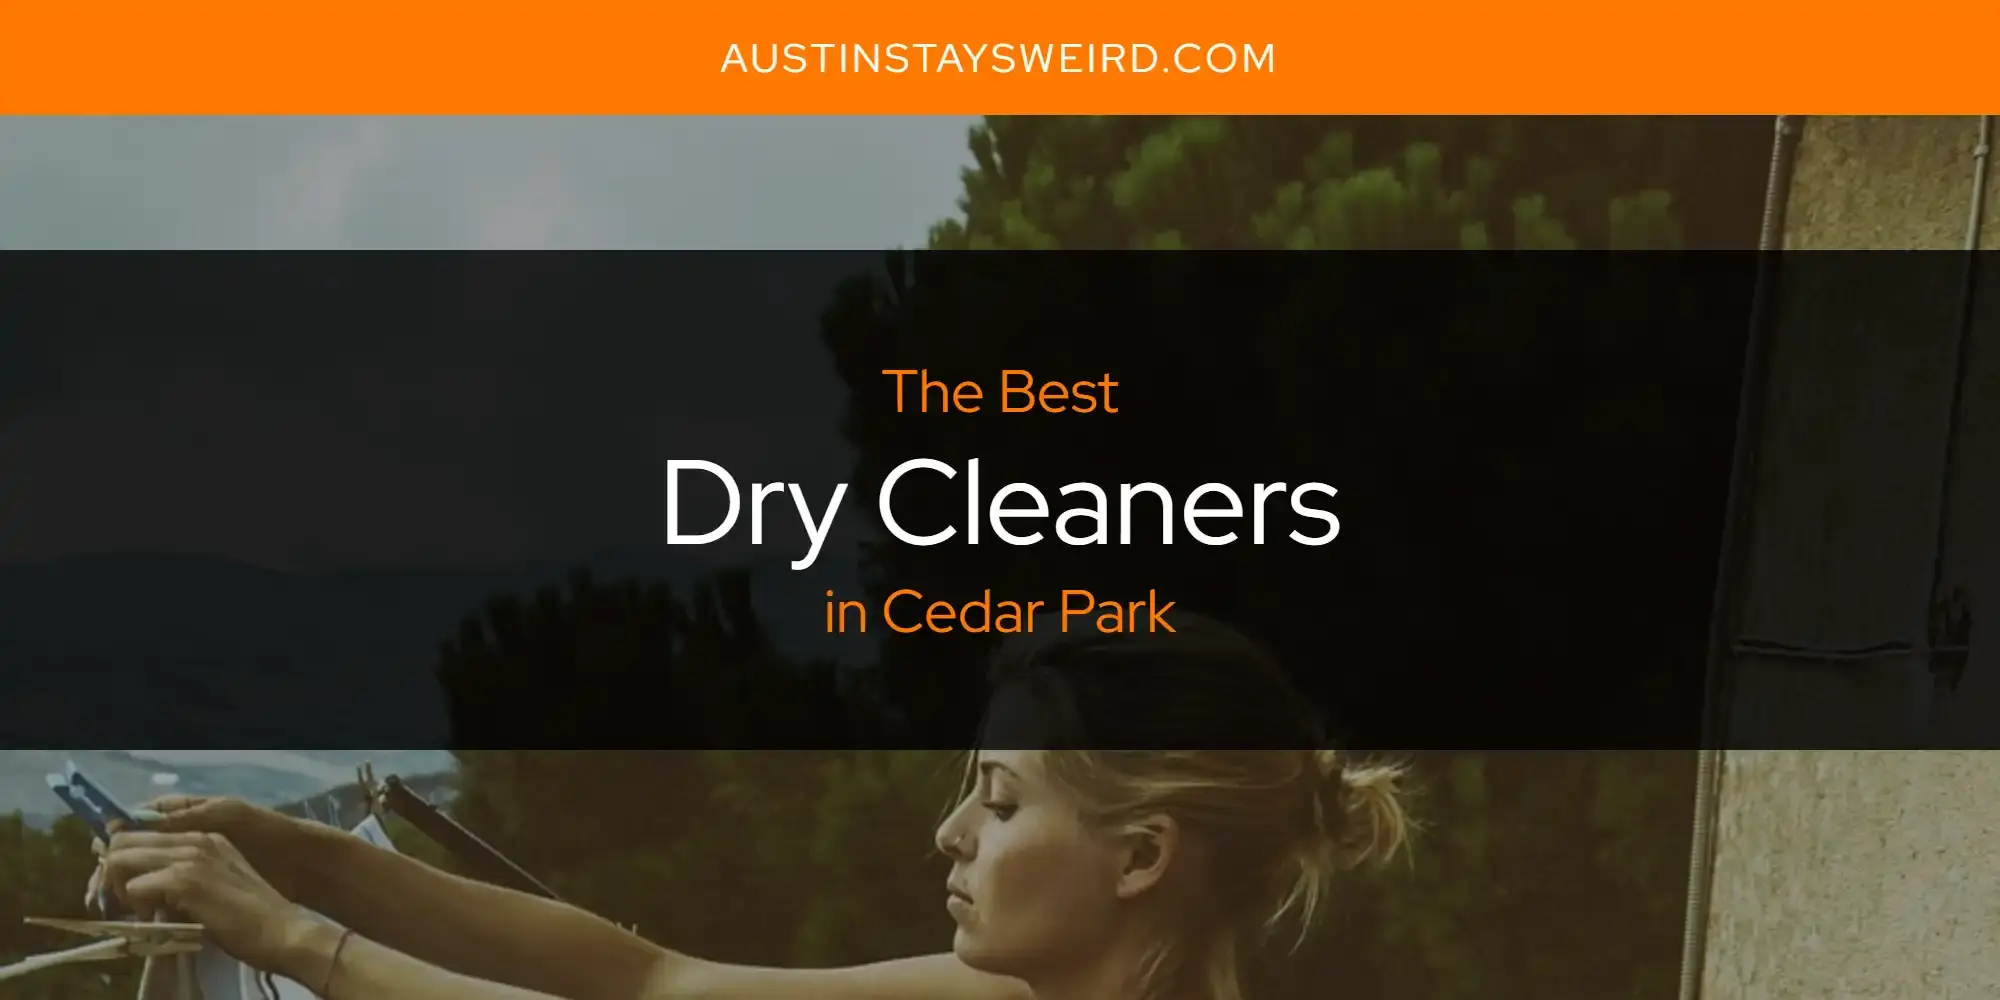 Best Dry Cleaners in Cedar Park? Here's the Top 8